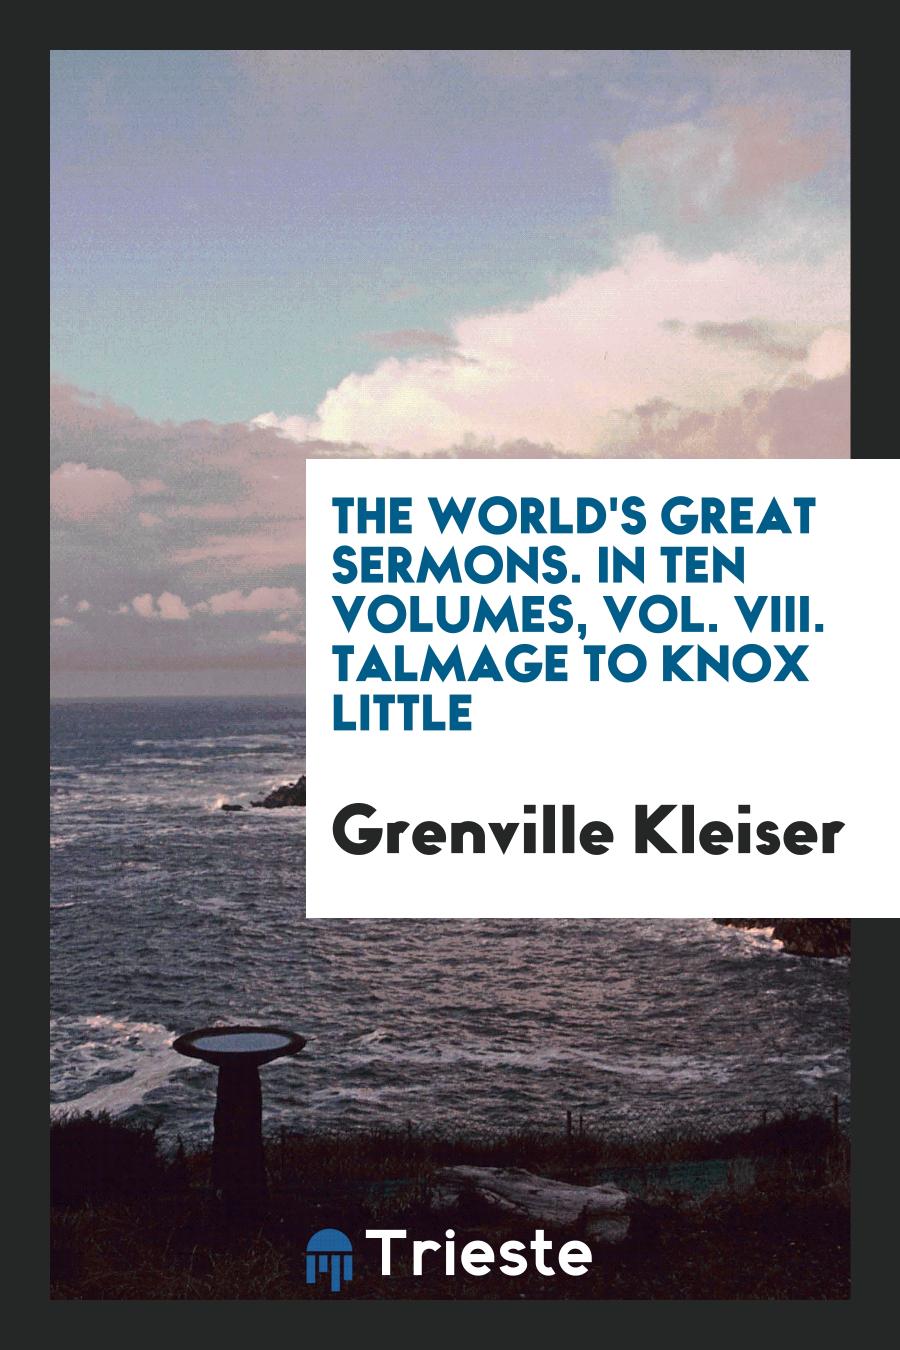 The World's Great Sermons. In Ten Volumes, Vol. VIII. Talmage to Knox Little